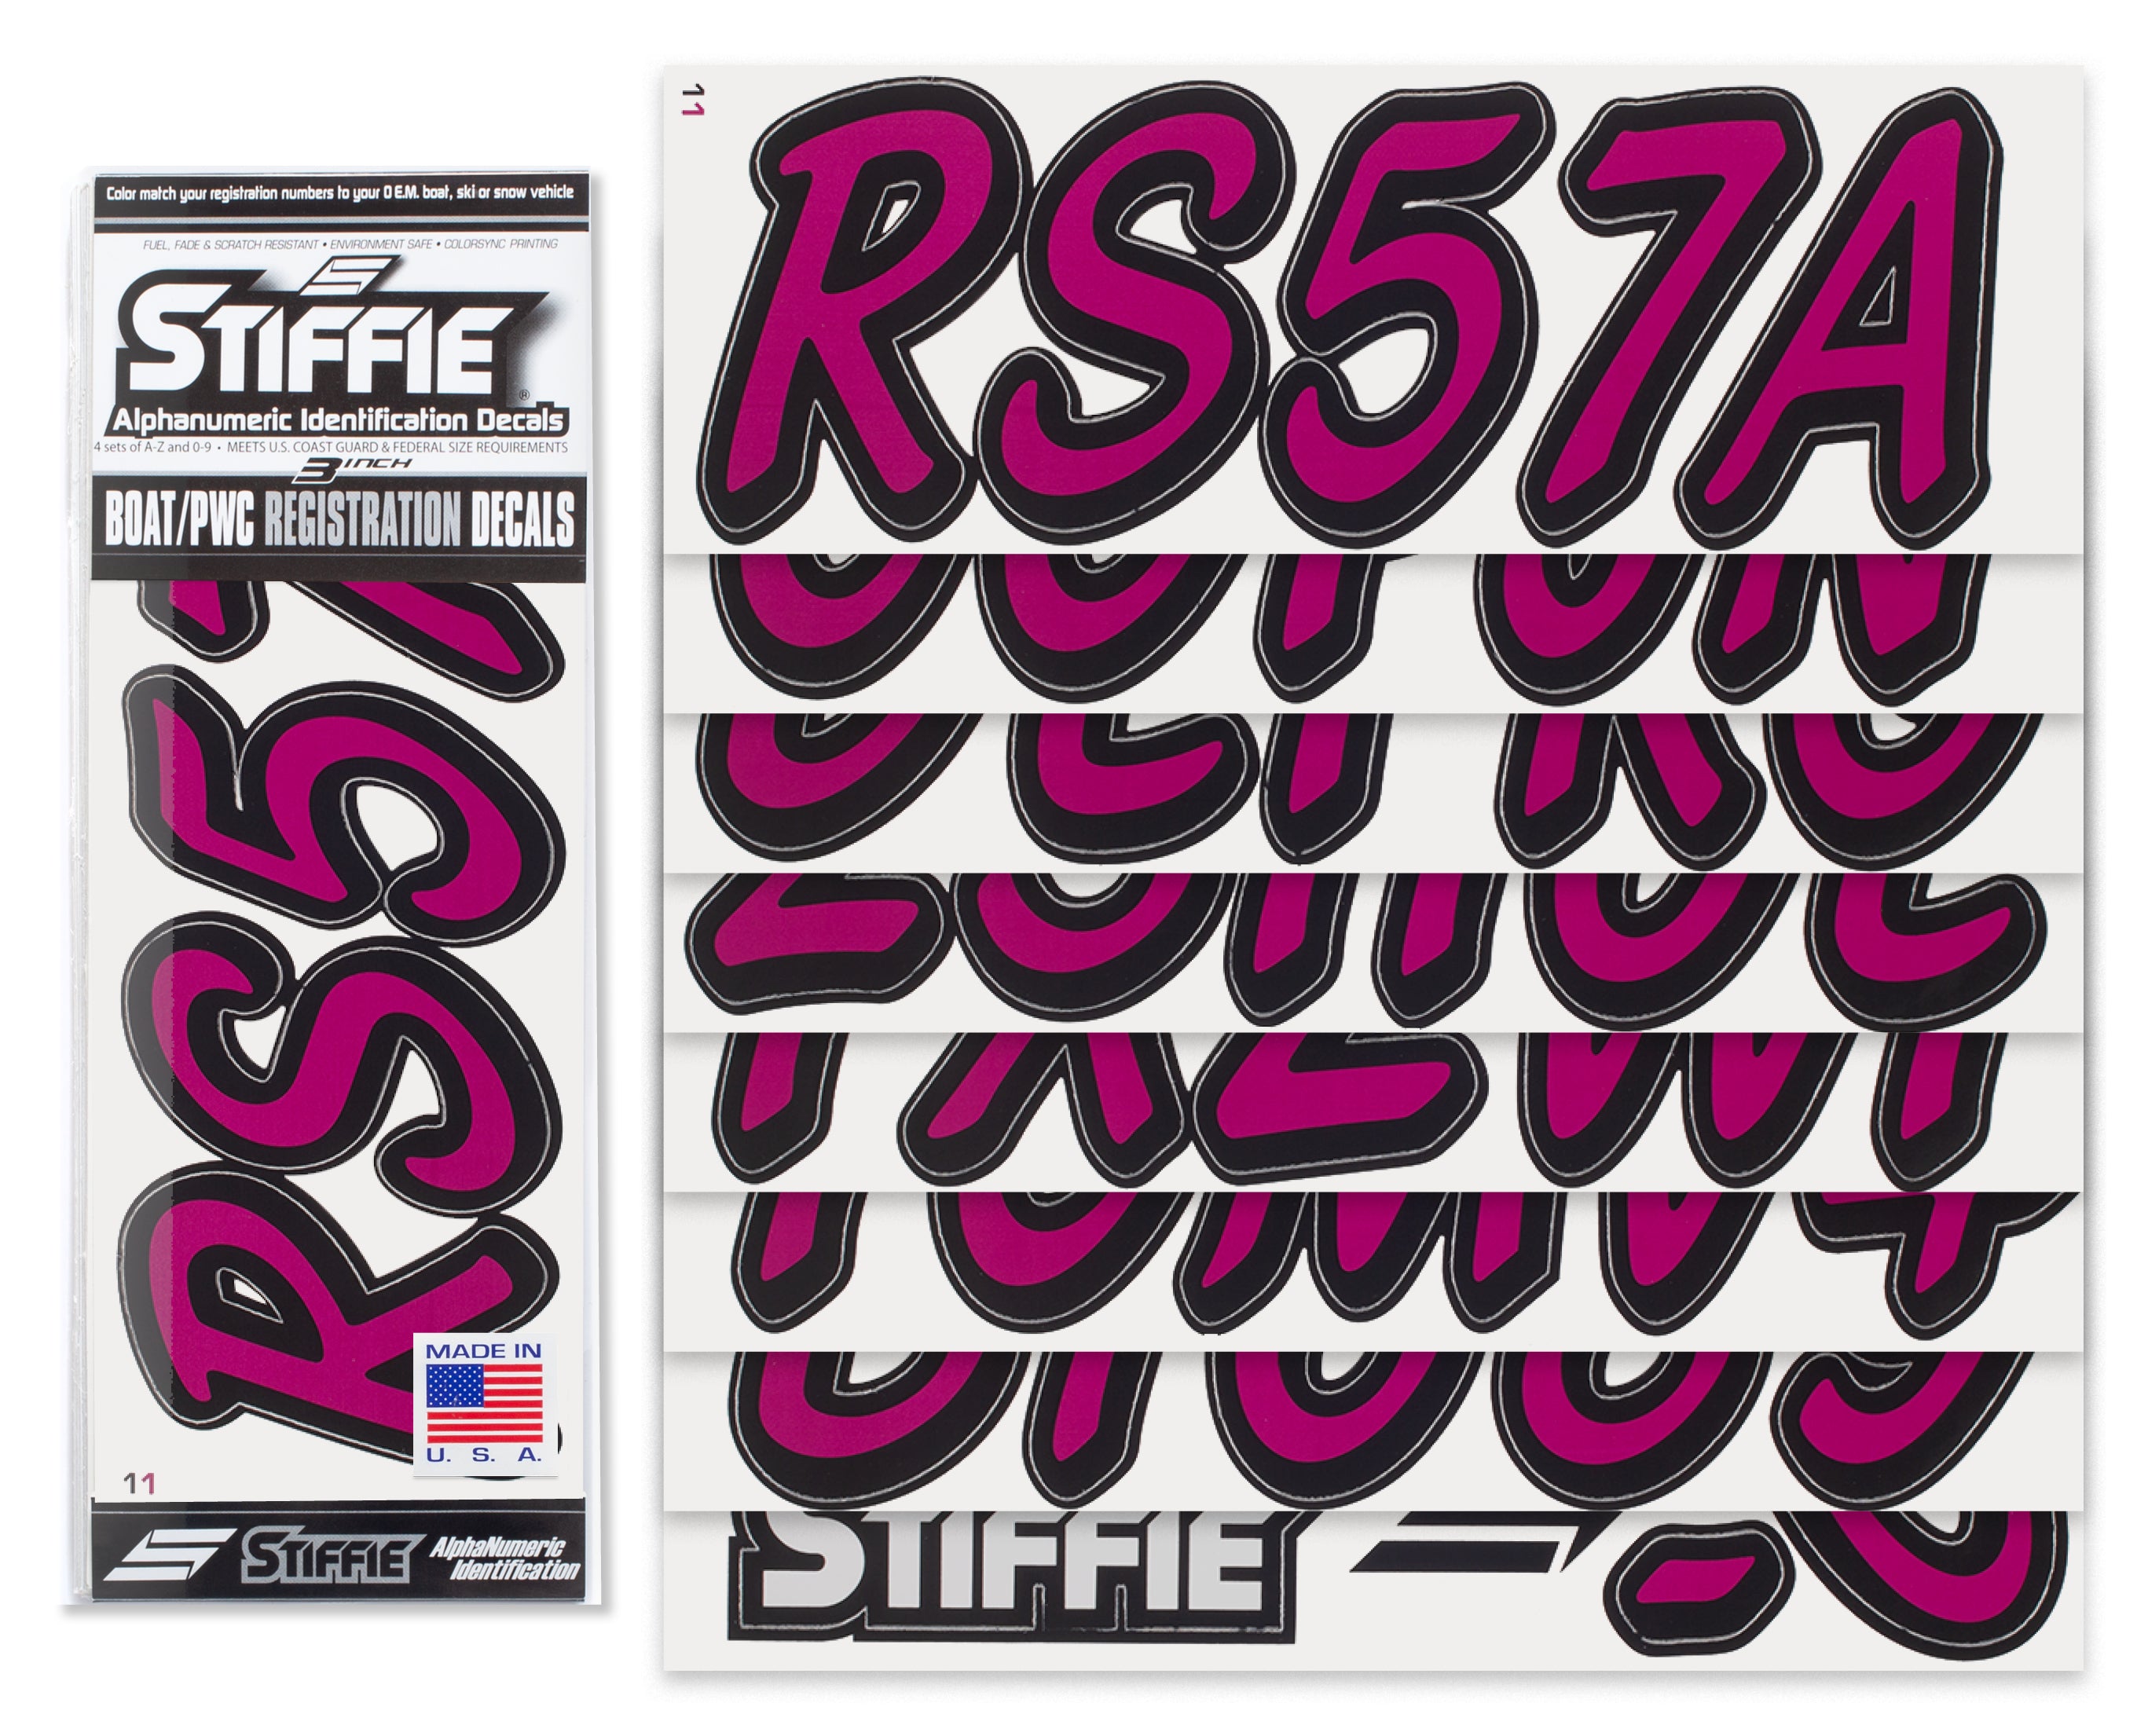 STIFFIE Whipline Solid Wine/Black 3" Alpha-Numeric Registration Identification Numbers Stickers Decals for Boats & Personal Watercraft